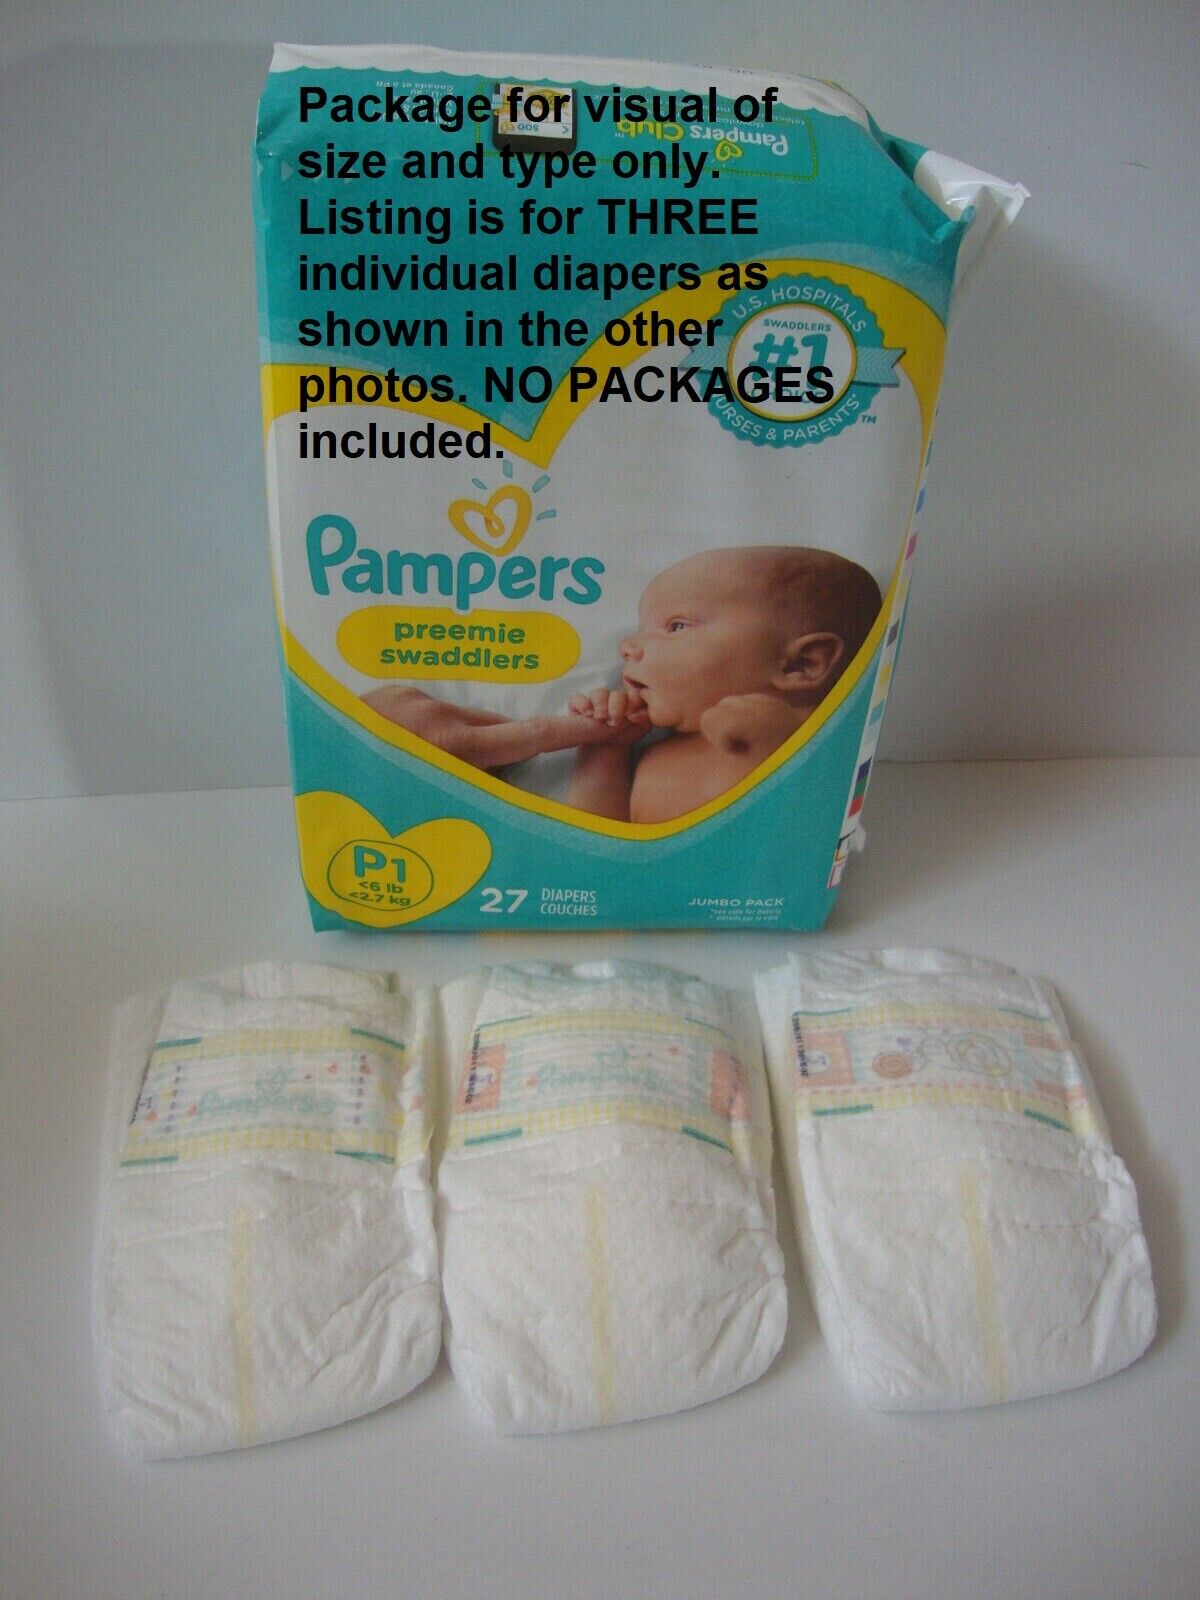 Pampers Swaddlers Preemie 6 pounds lot of 3 individual diapers reborn doll Pampers